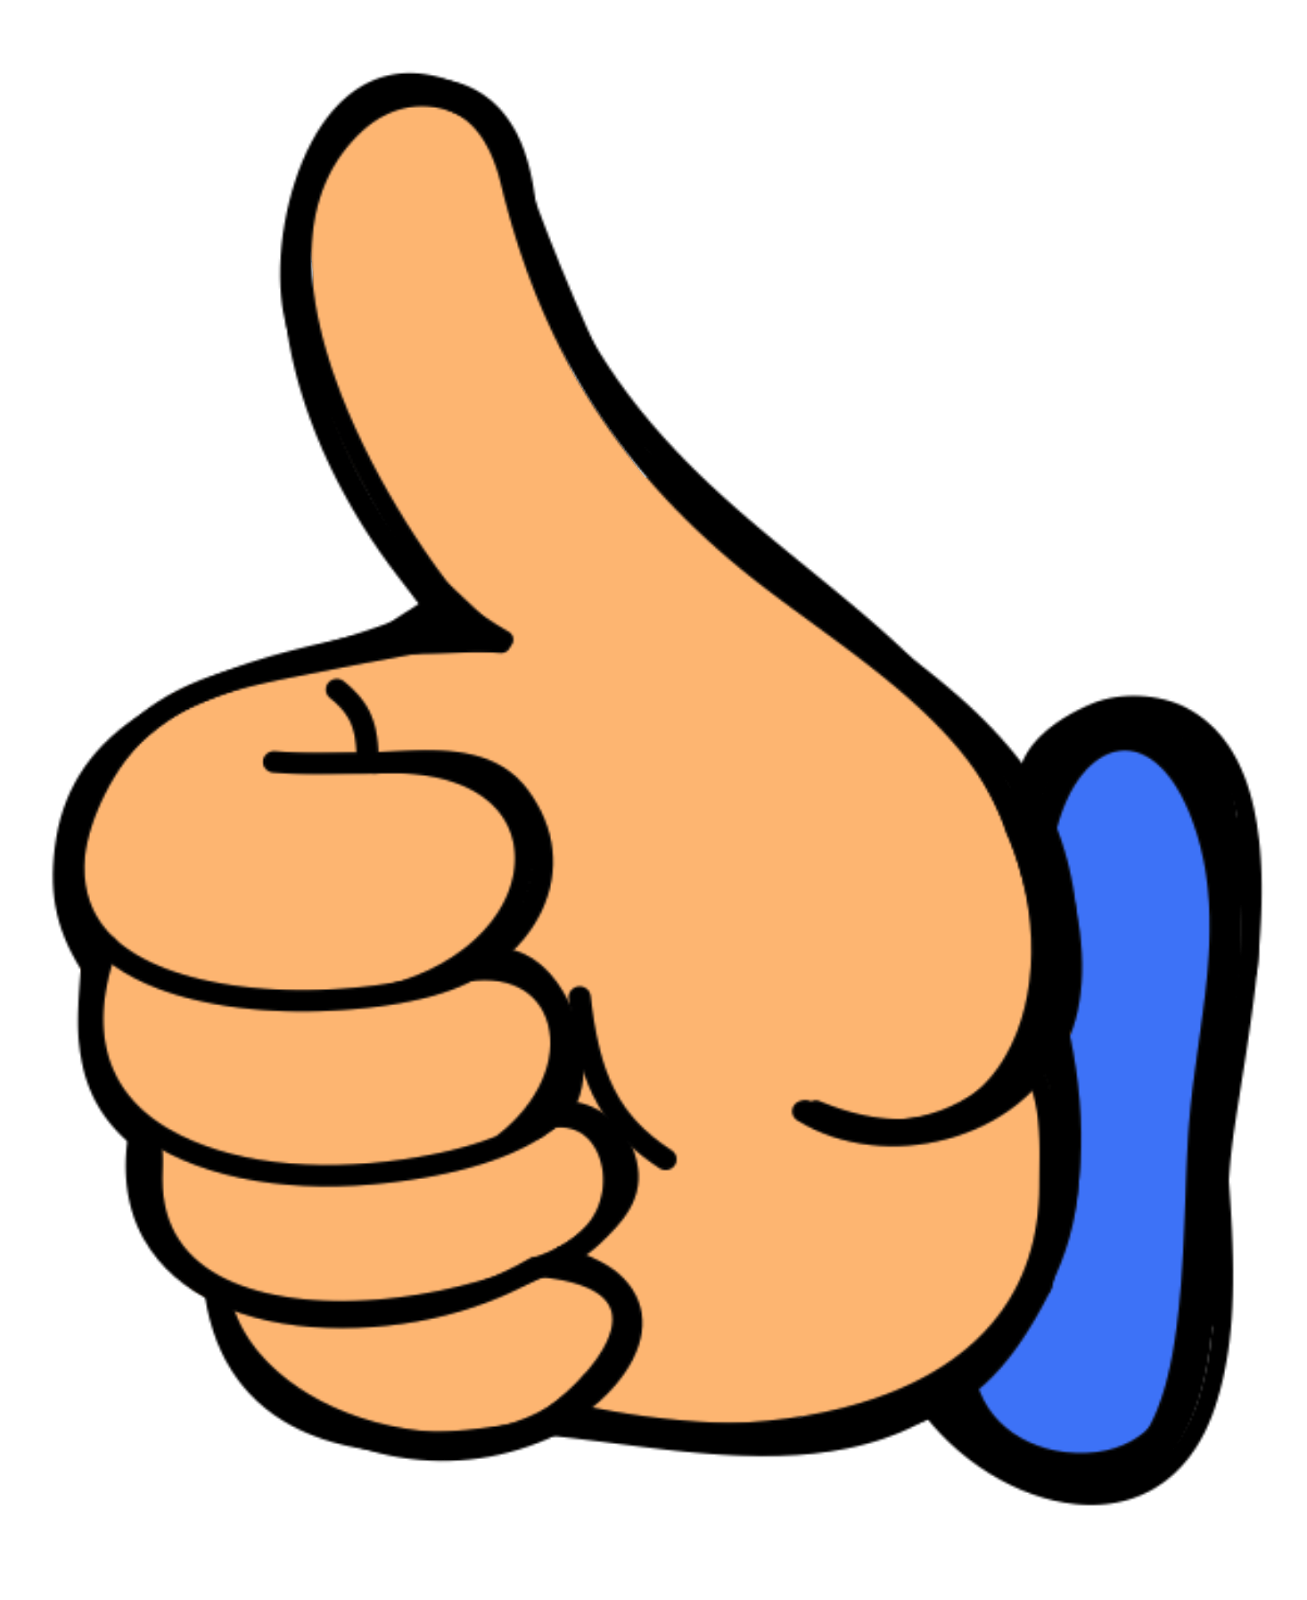 thumbs-up-i-get-it-6w0LkE-clipart.png